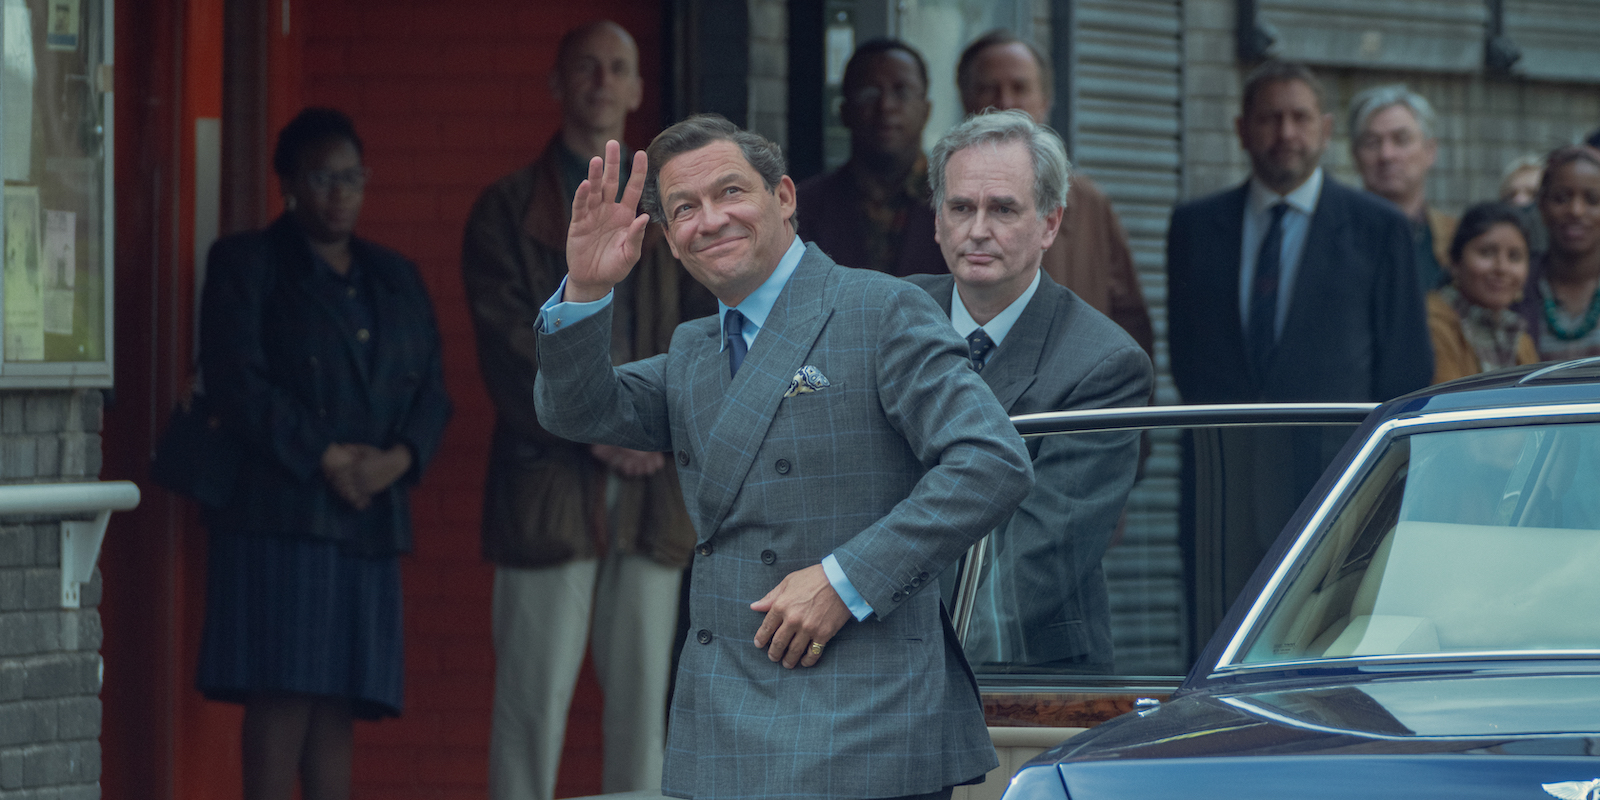 'The Crown' Season 5: Prince Charles (Dominic West) waves as he exits a car